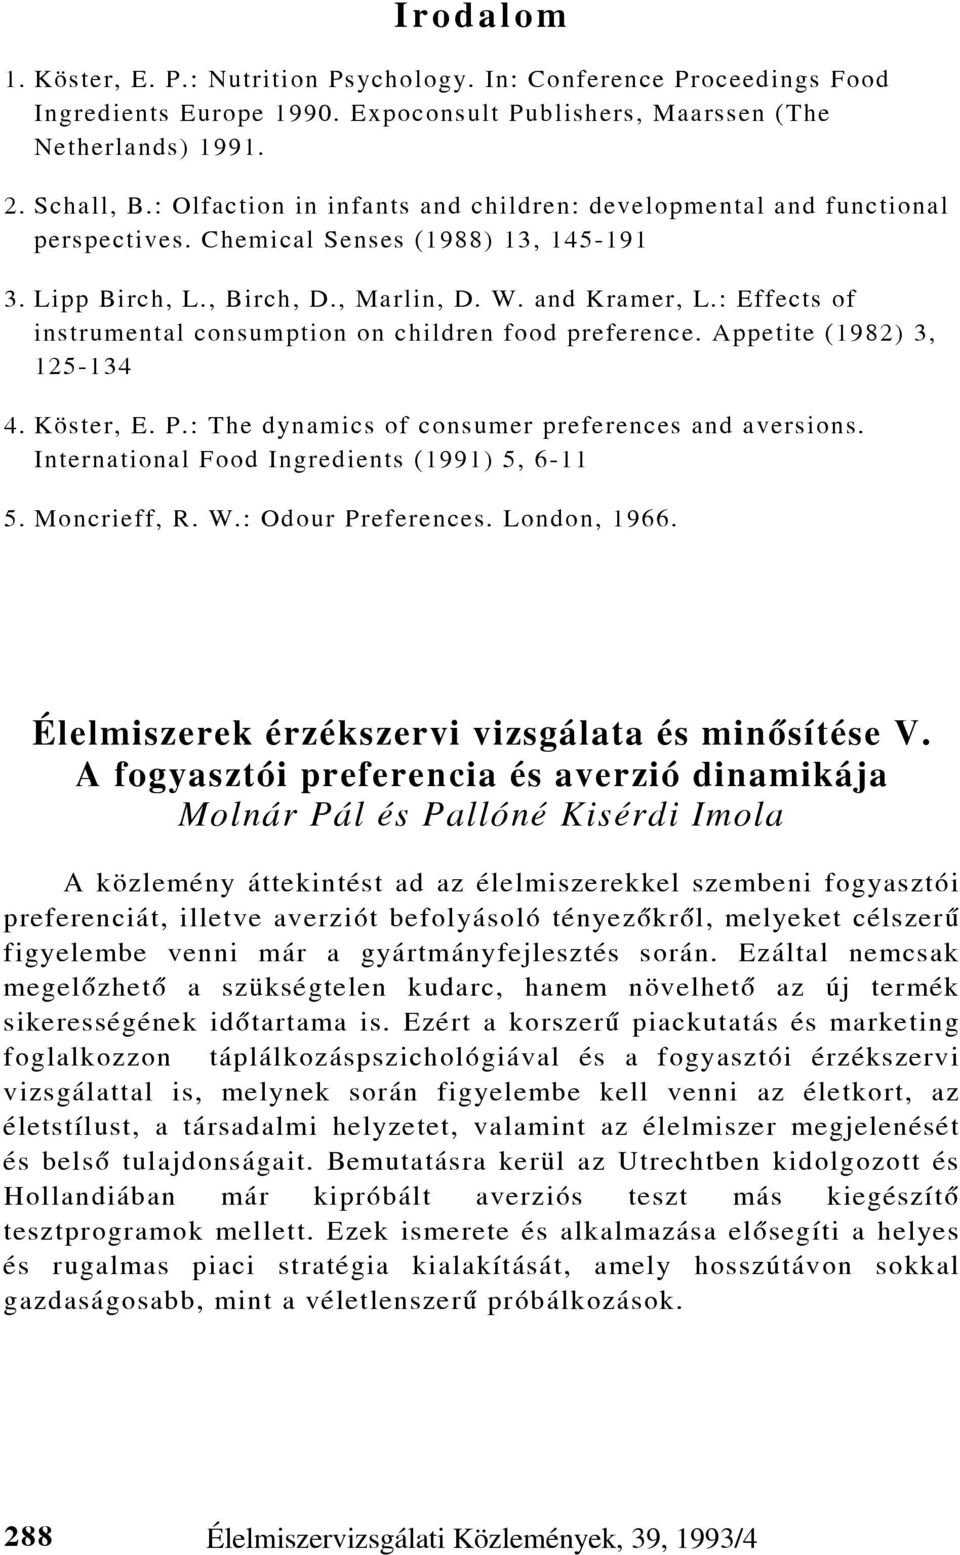 : Effects of instrumental consumption on children food preference. Appetite (1982) 3, 125-134 4. Köster, E. P.: The dynamics of consumer preferences and aversions.